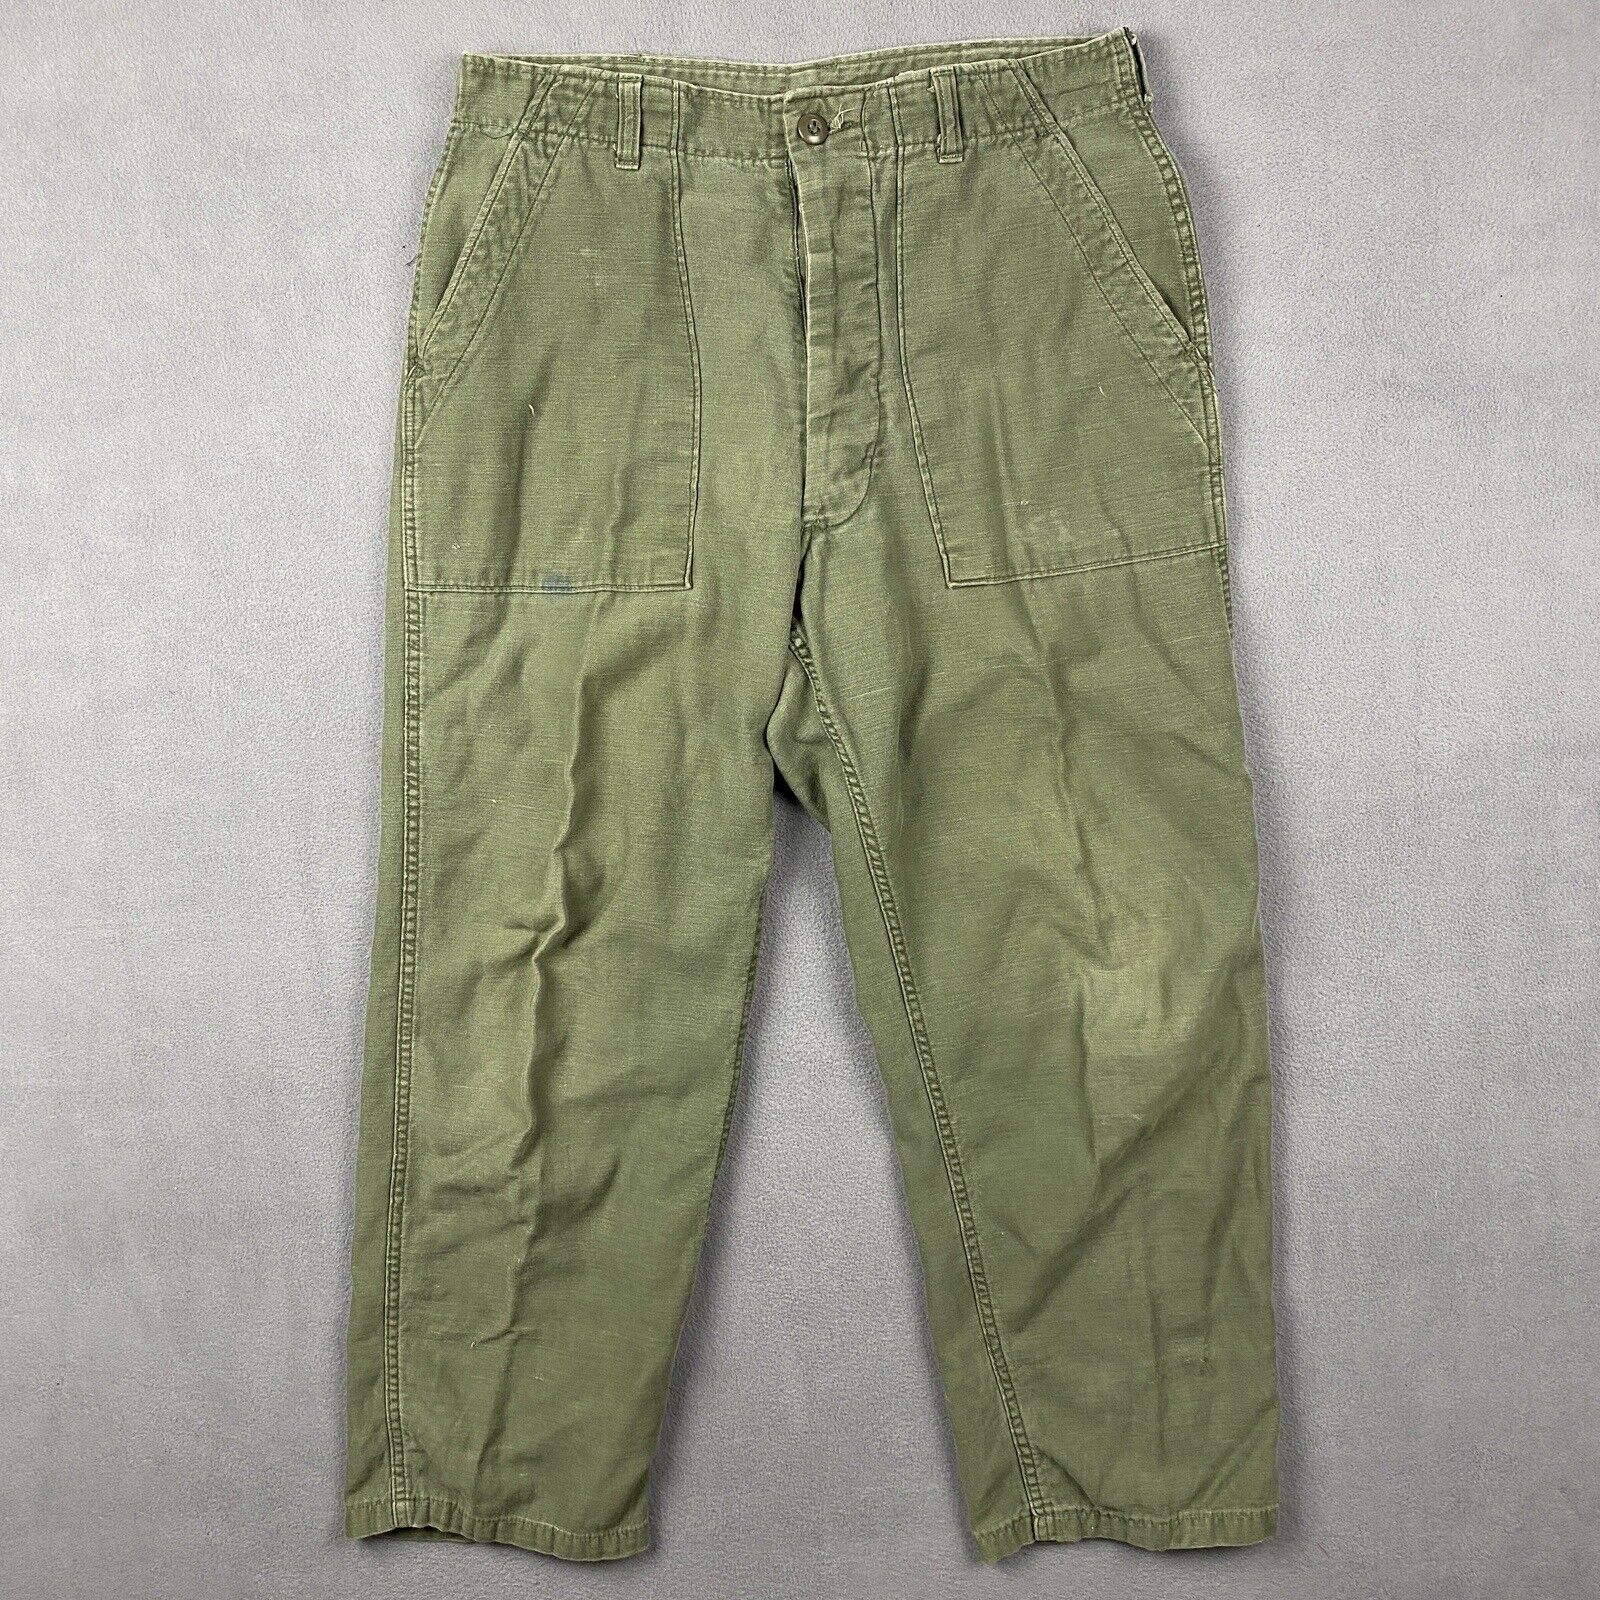 Vintage US Army OG-107 Pants 32x26 Green Military Vietnam Button Fly Rare